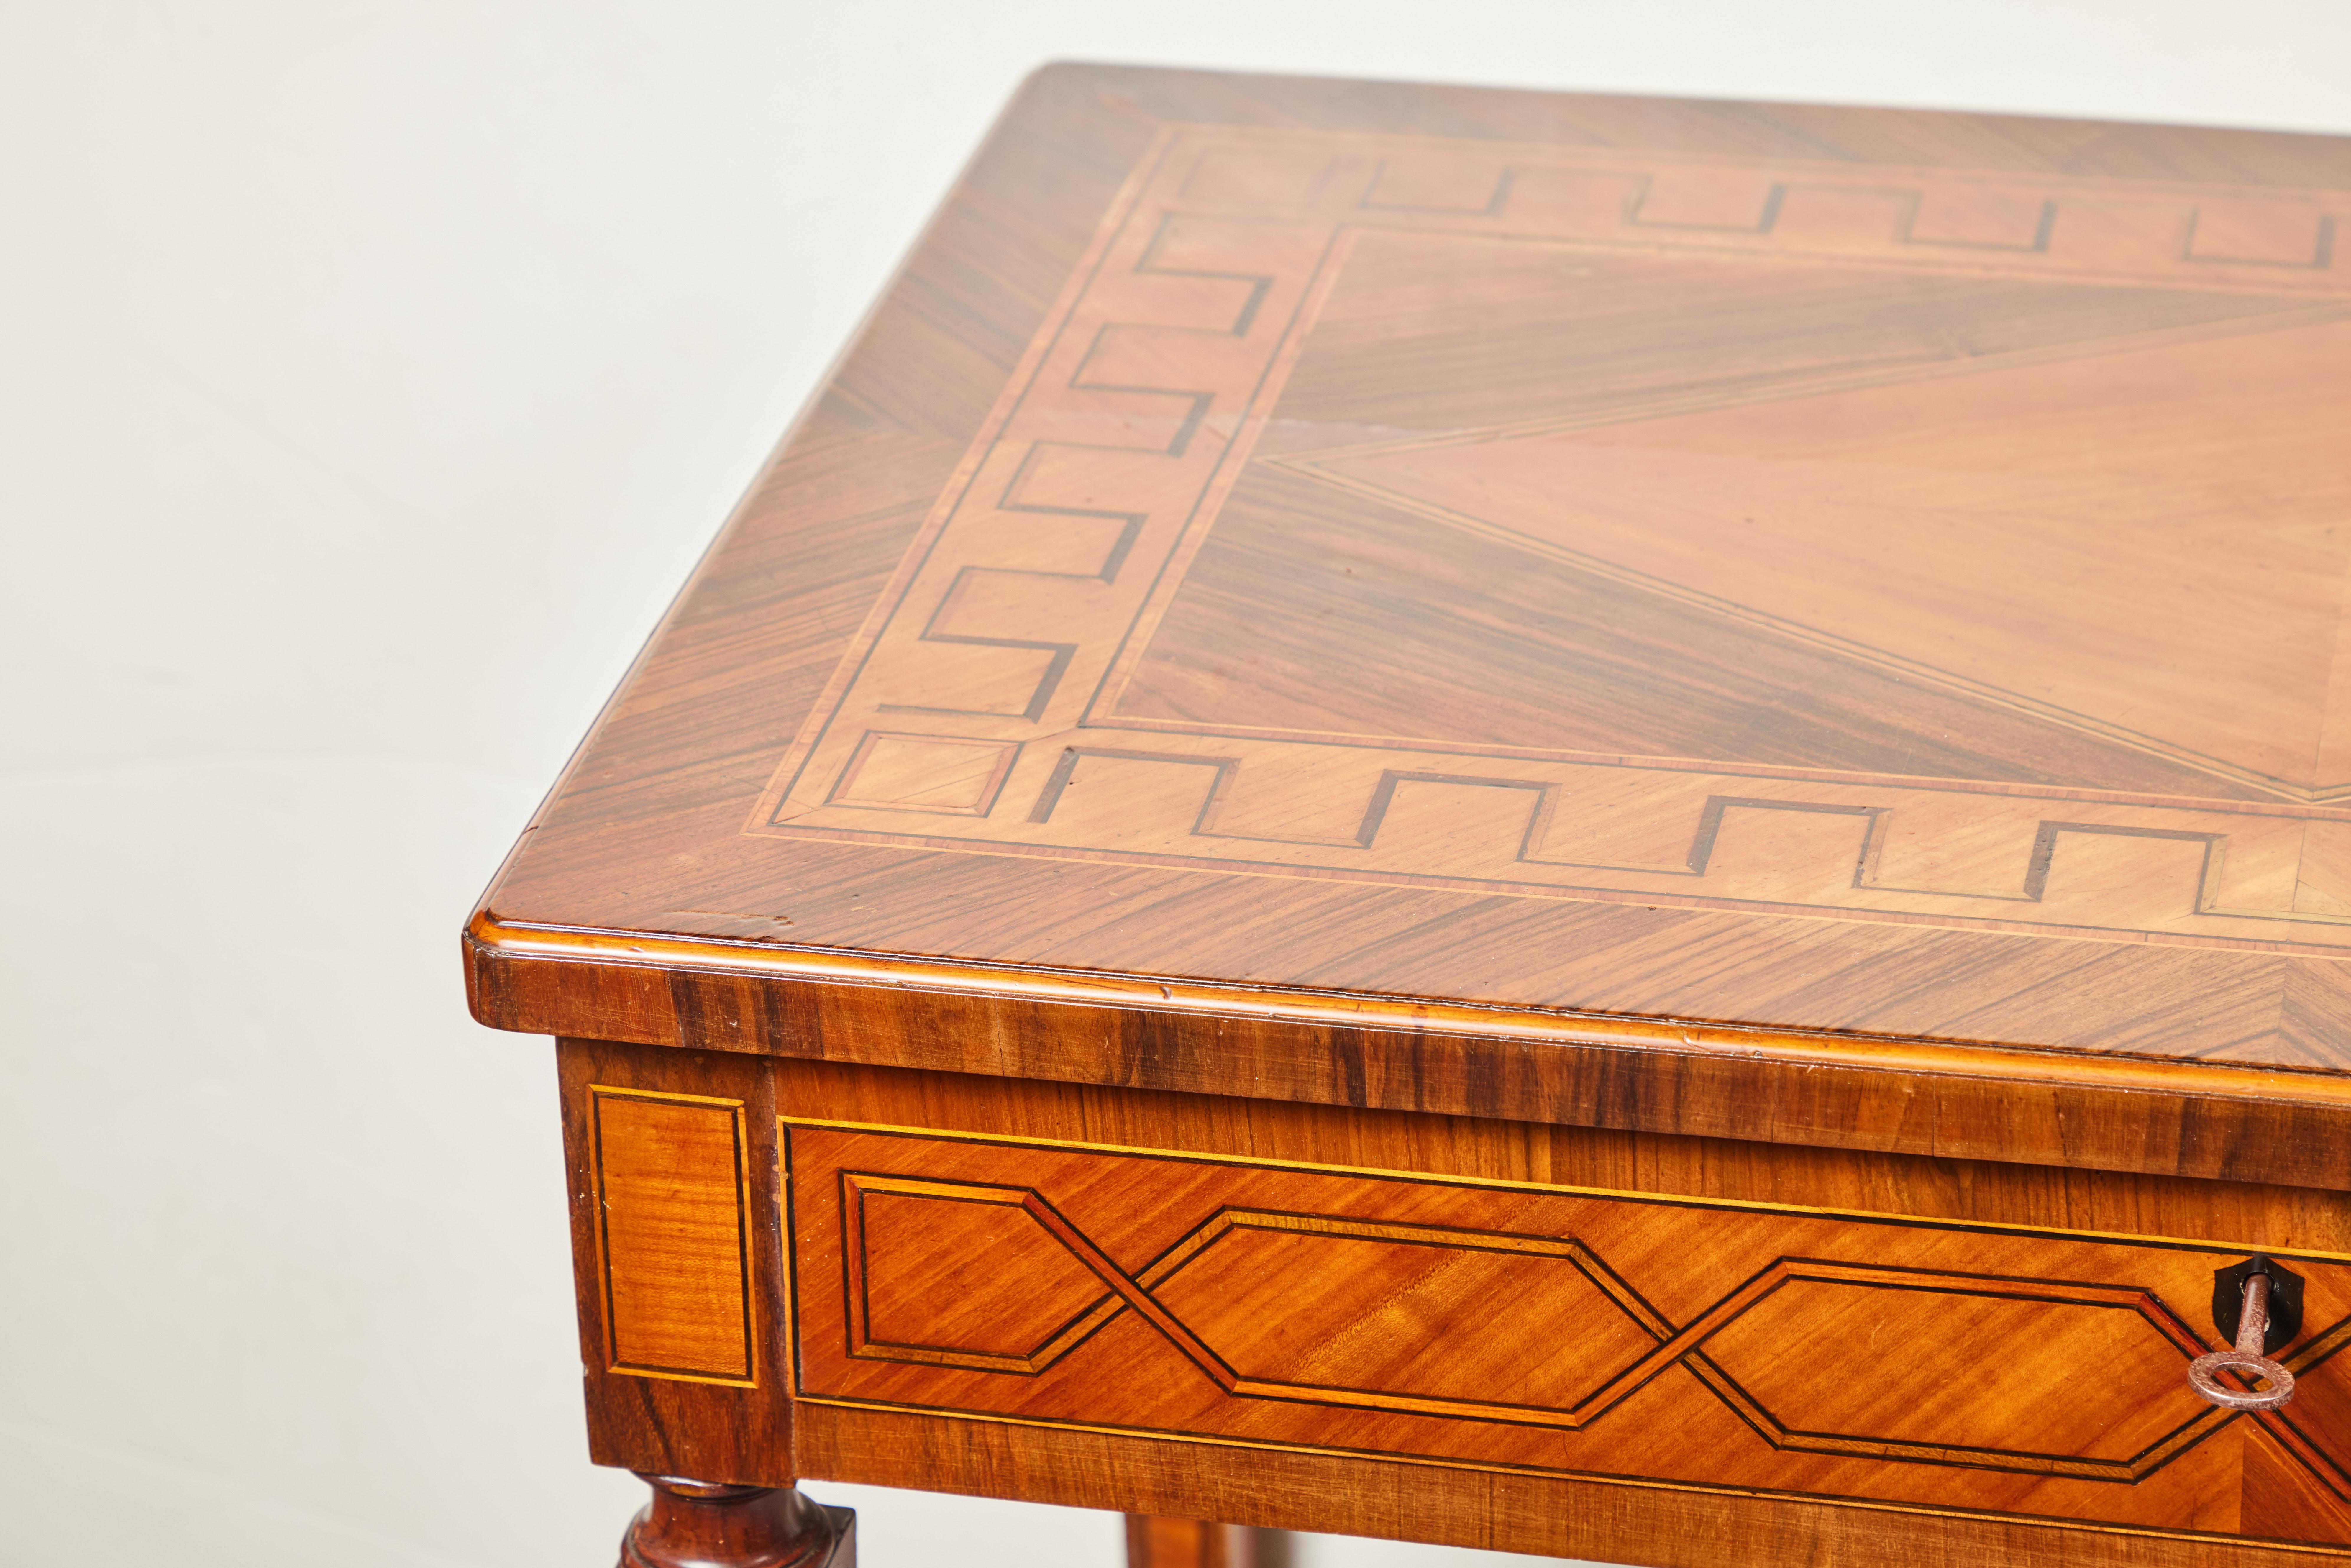 A beautifully hand-carved and inlaid, c. 1825, Italian, single drawer, tapered leg writing desk with extended tablets on the interior. The whole in walnut, pear, and olive woods with ebonized details. From a private collection, Florence.